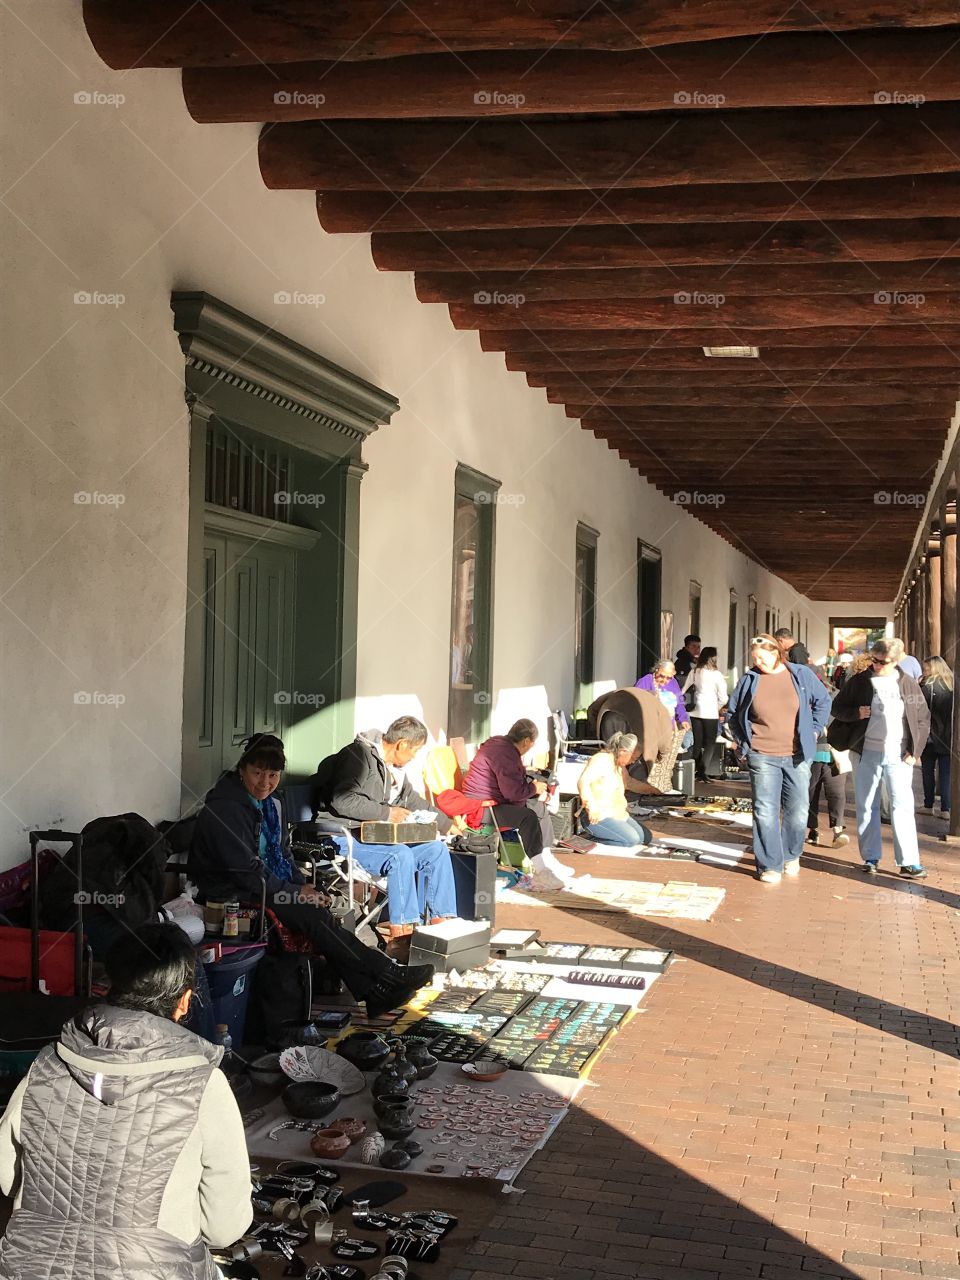 Native American art market at the historic Palace of the Governors on the Santa Fe Plaza (New Mexico)